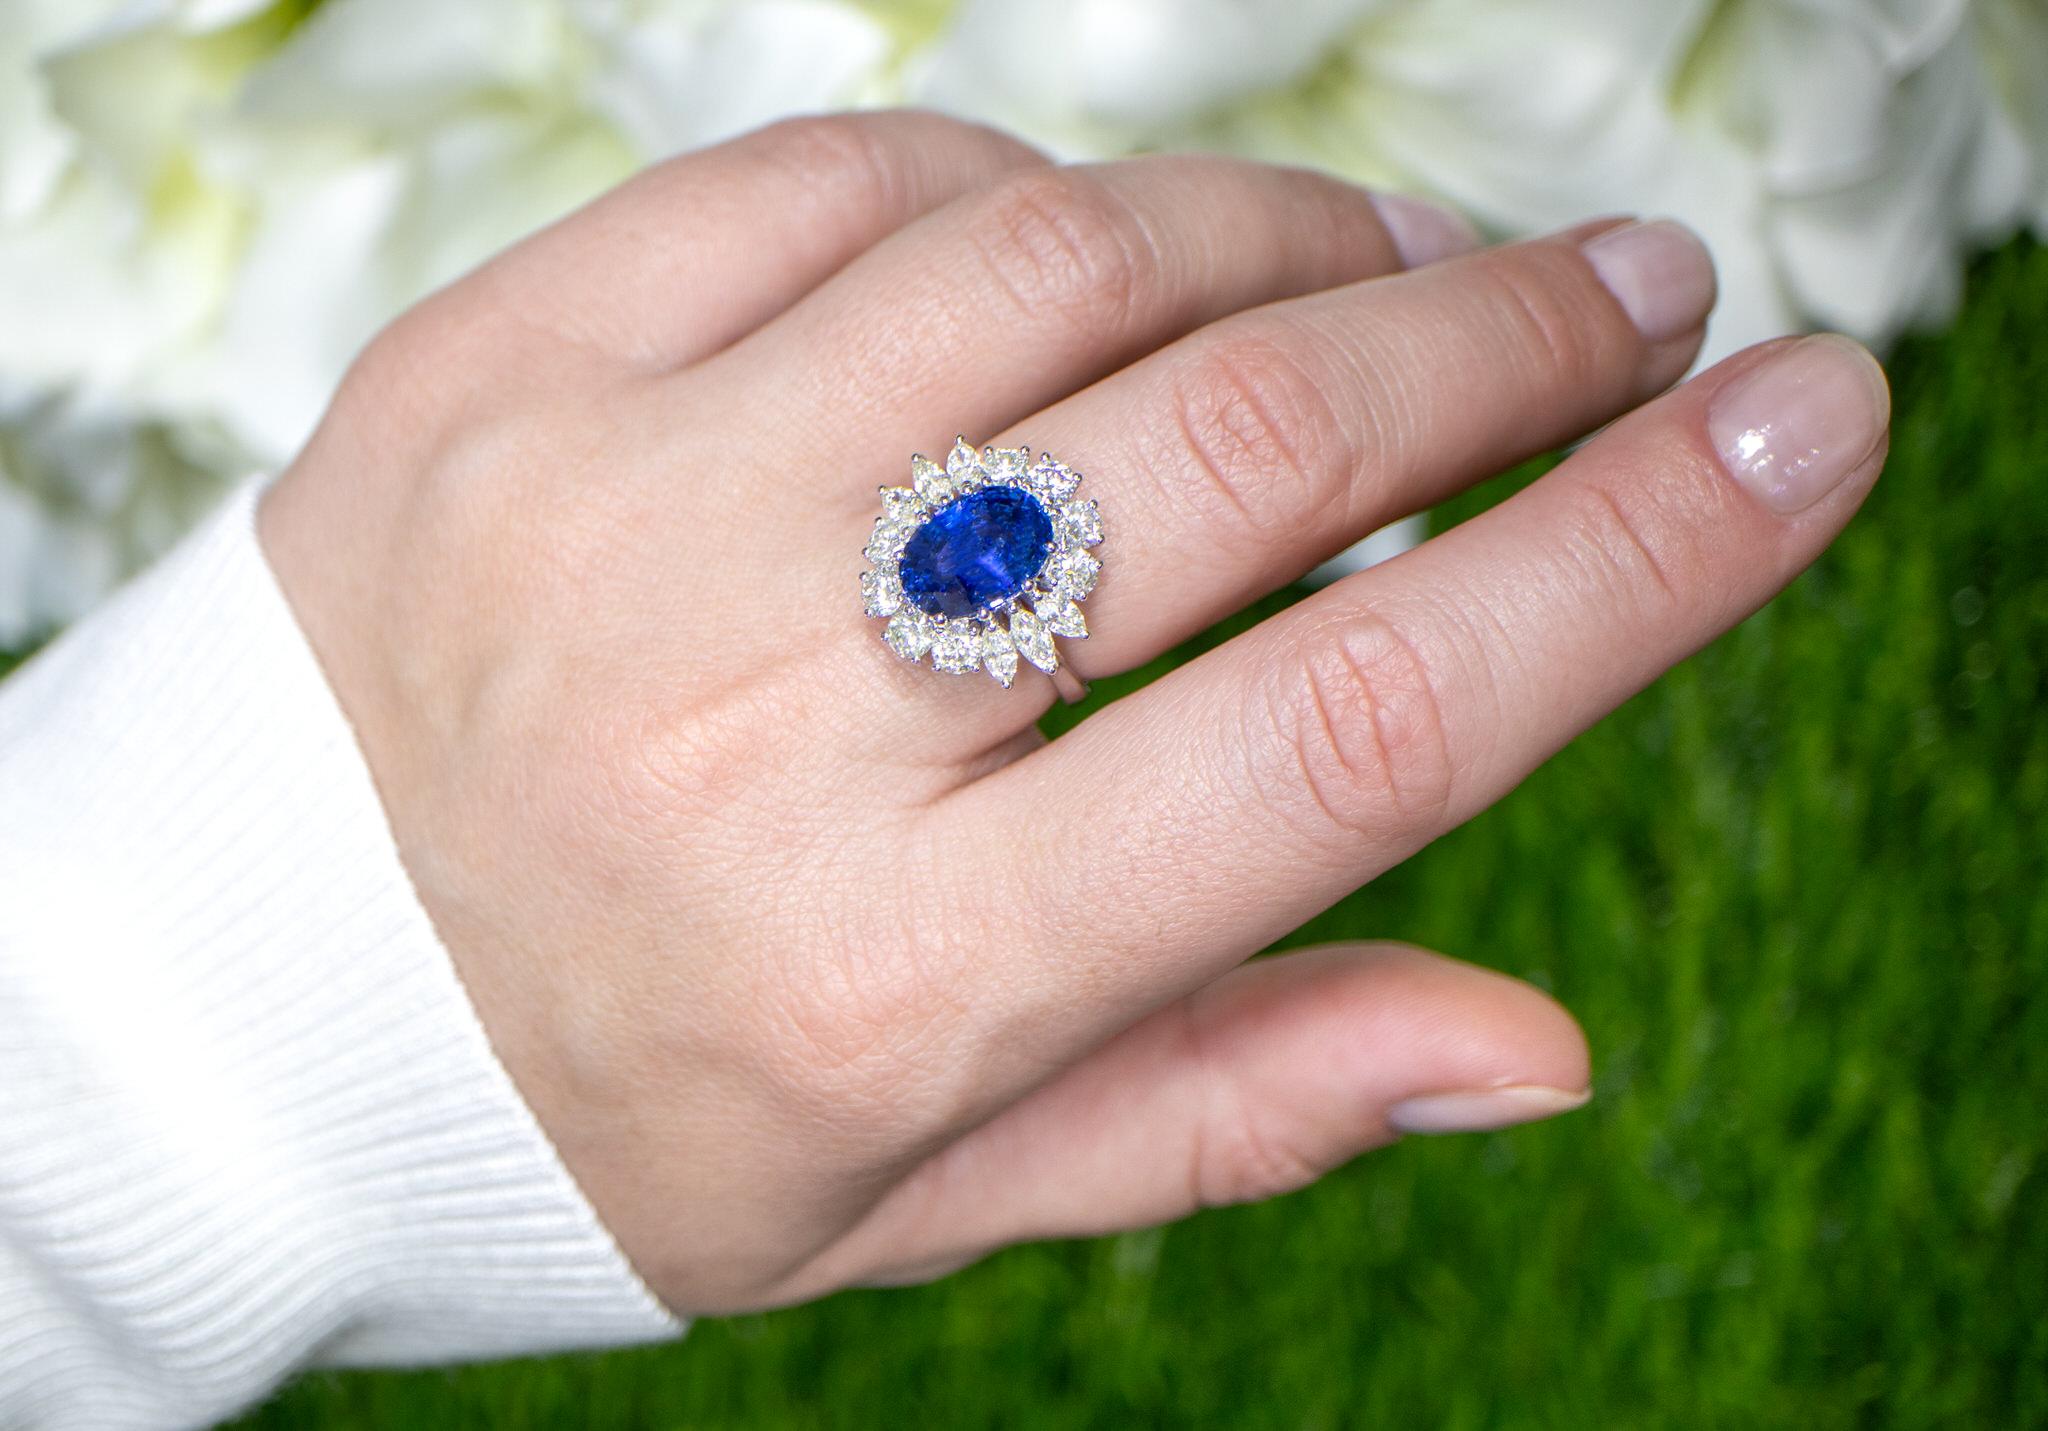 Oval Cut IDL Certified Ceylon Sapphire Ring Large Diamond Halo 6.26 Carats 18K Gold For Sale